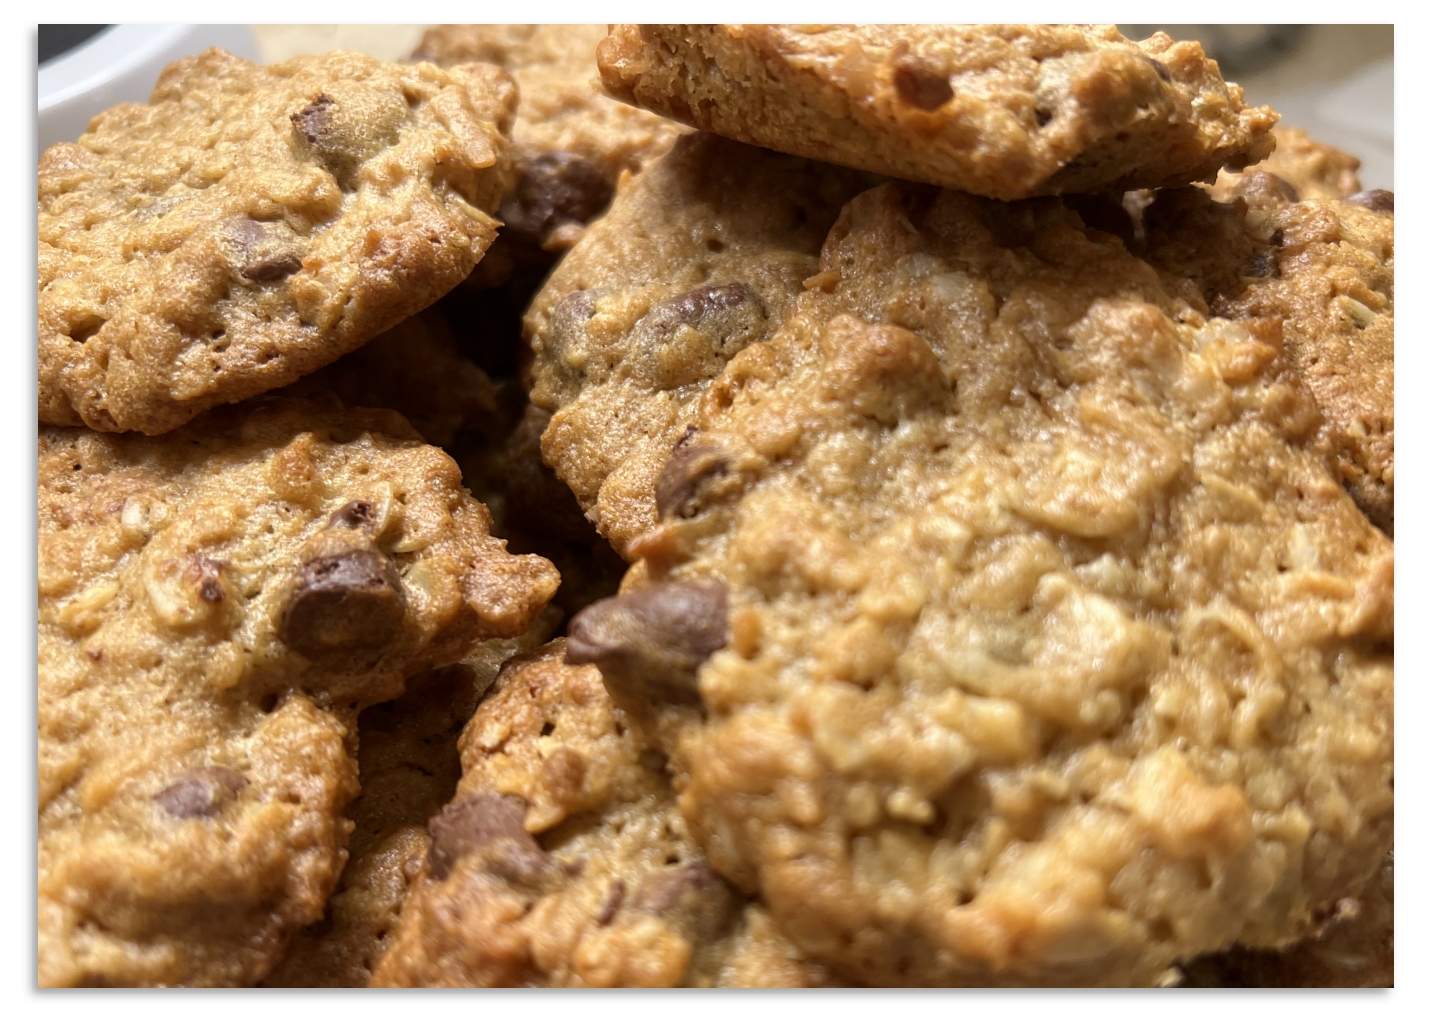 Peanut Butter Oatmeal Chocolate Cookies